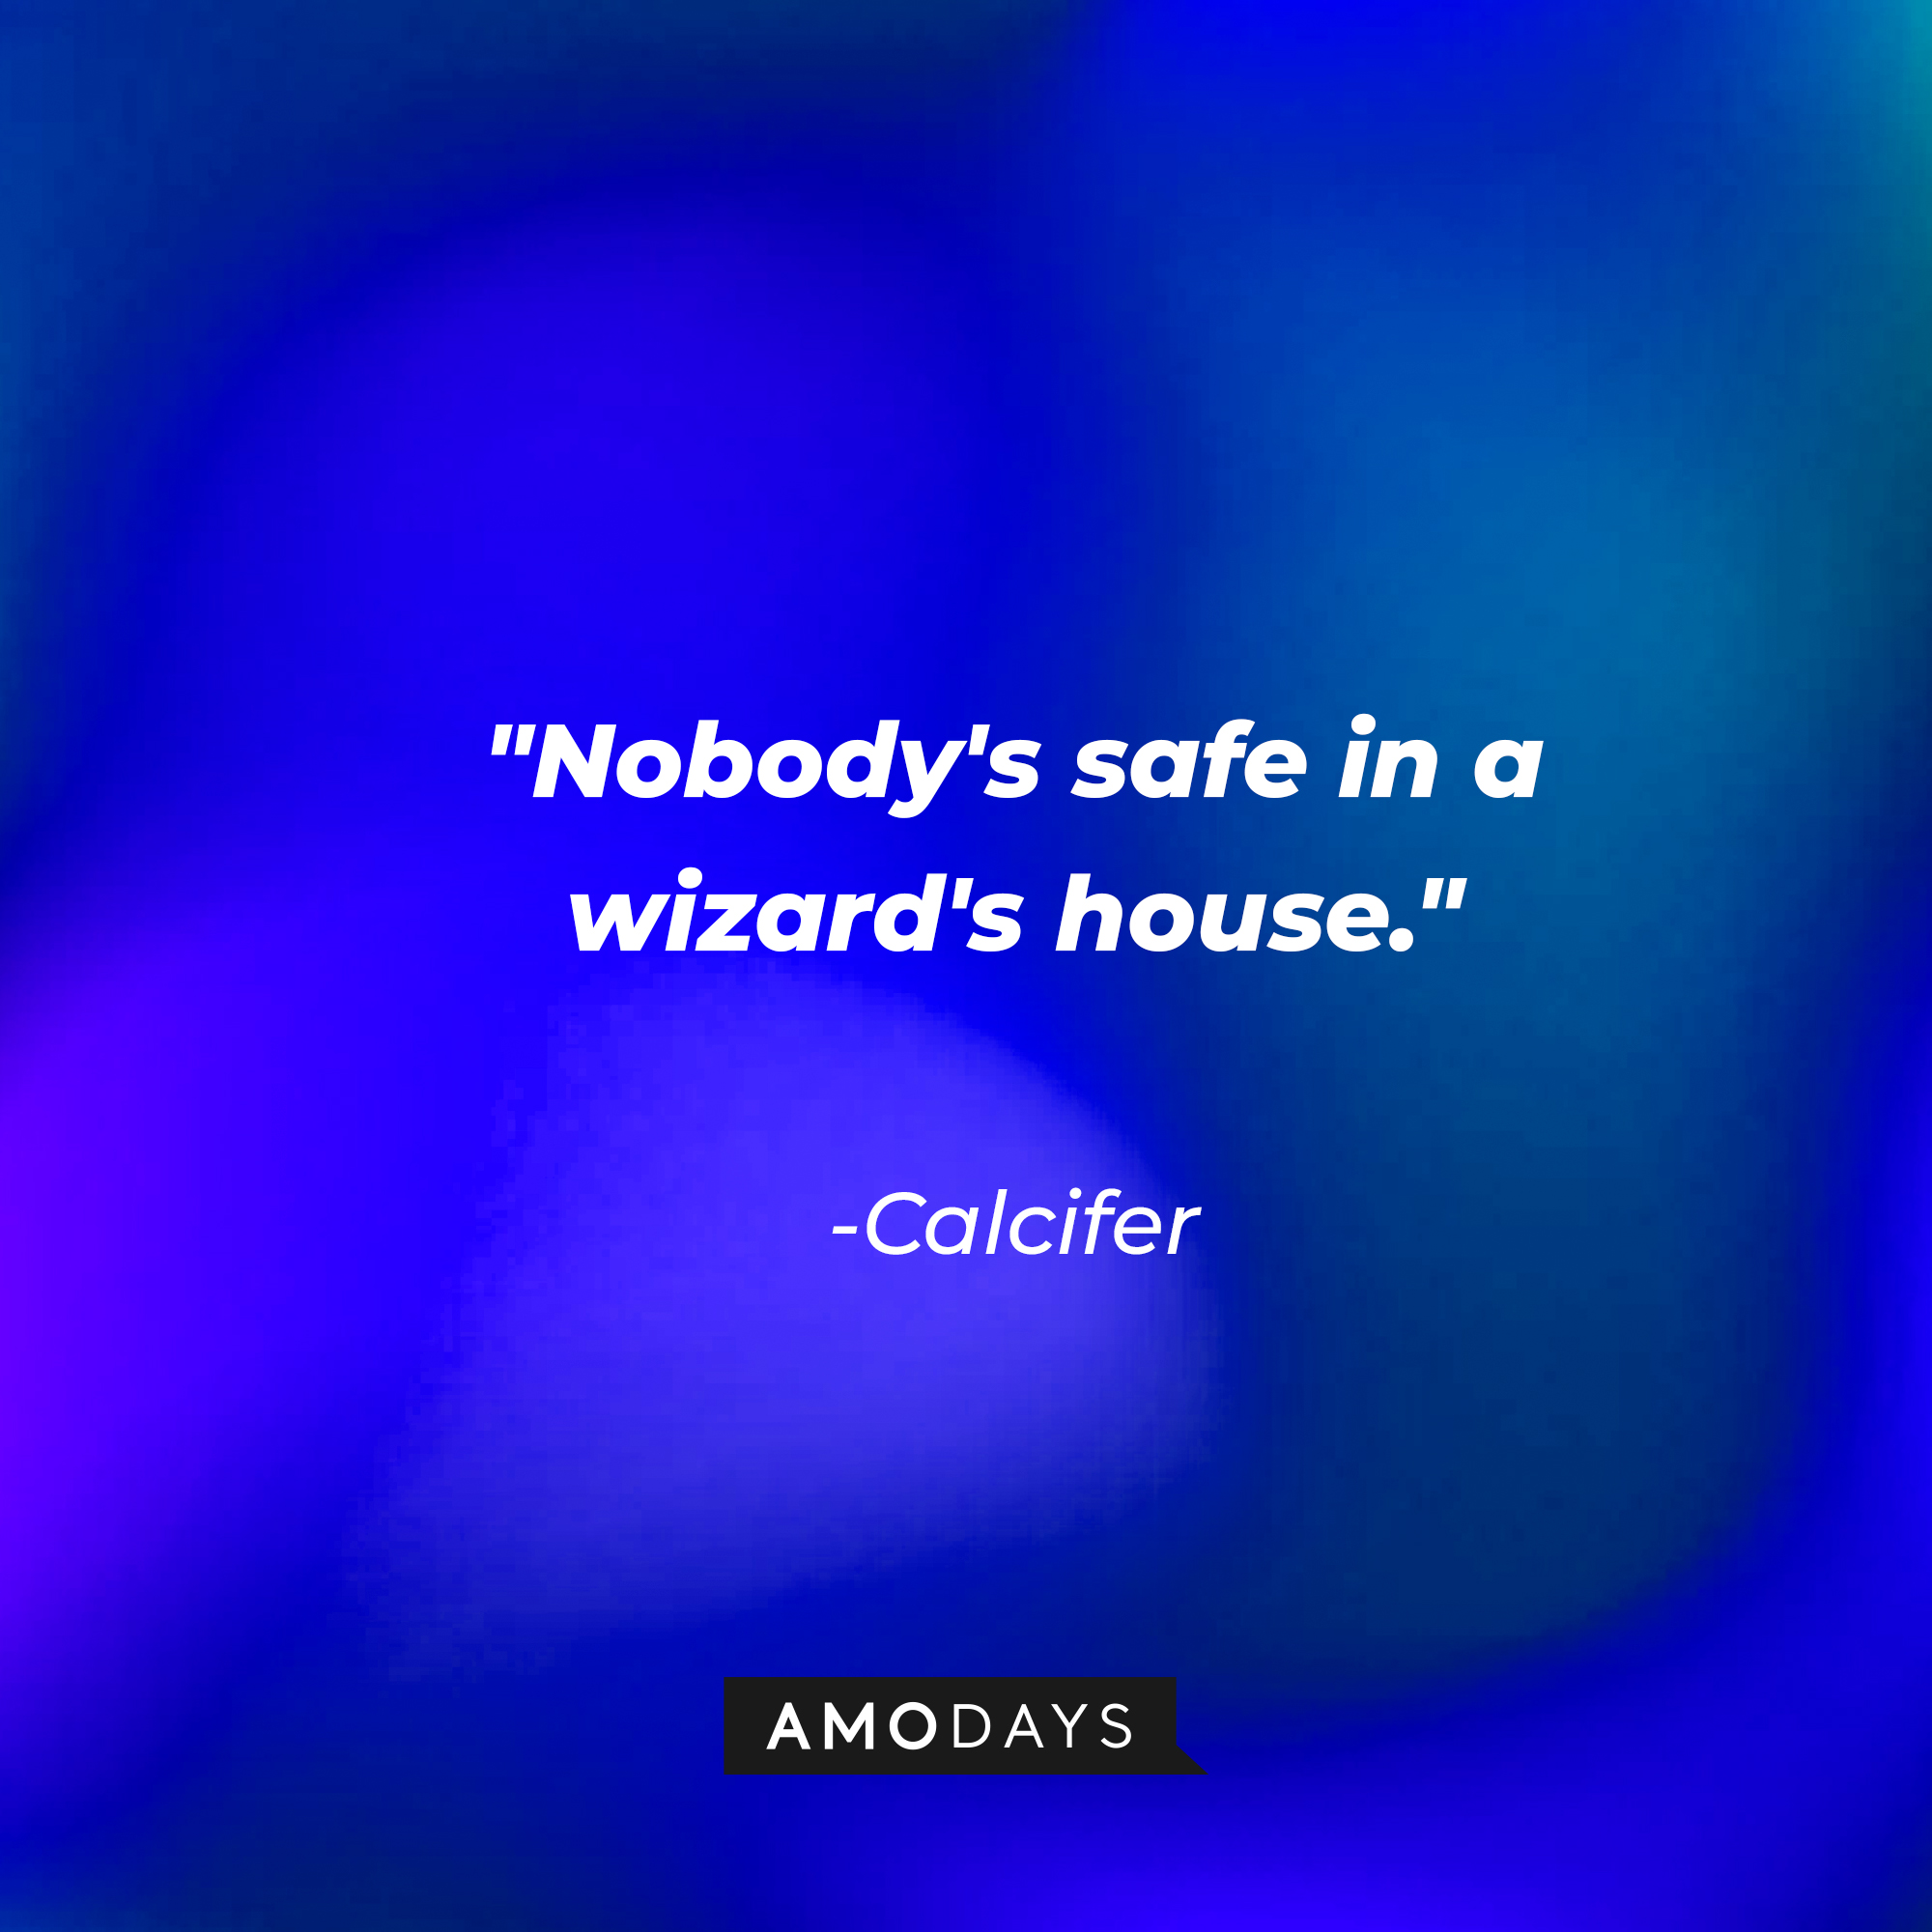 Calcifer's quote: "Nobody's safe in a wizard's house." | Source: Amodays